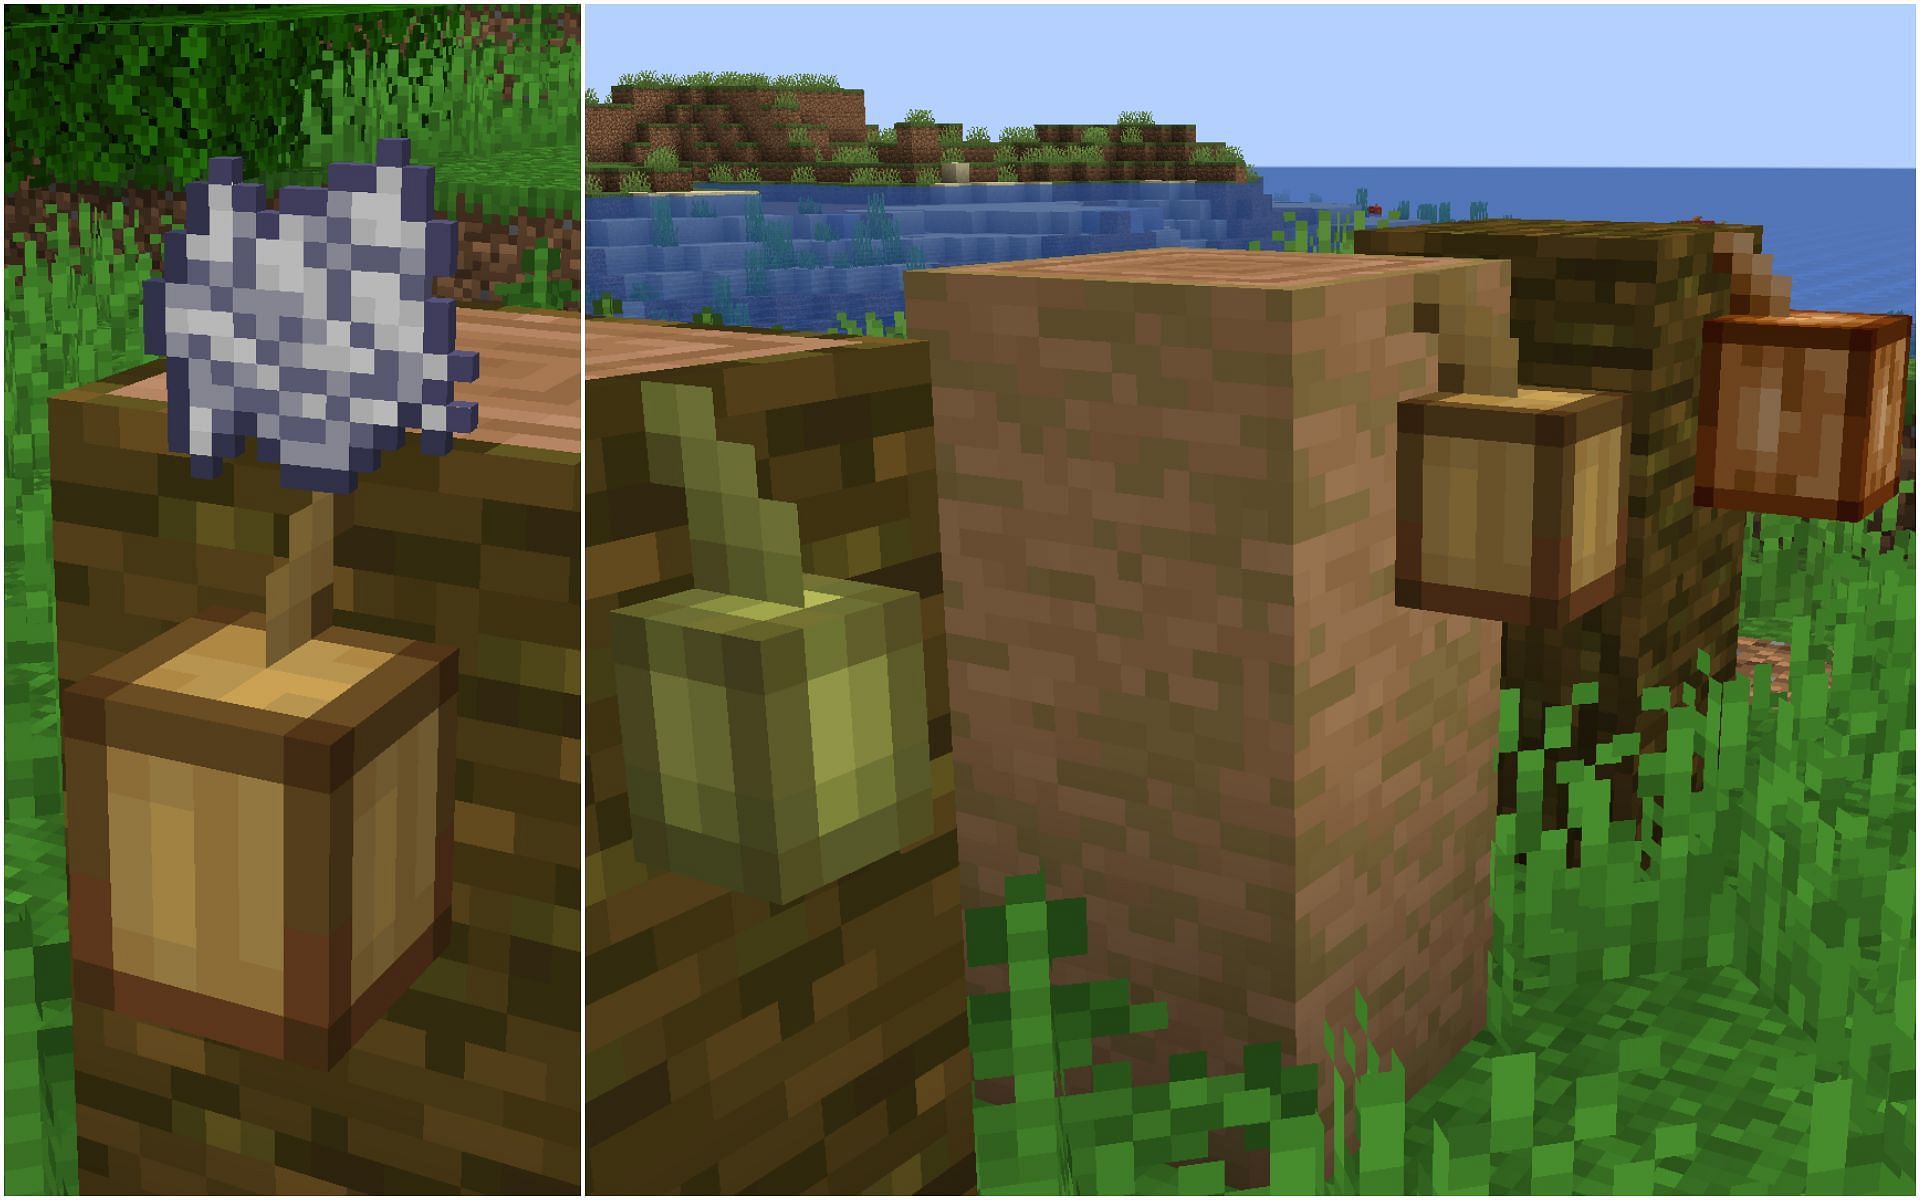 Bone meal can catalyst the growth of cocoa pods (Image via Minecraft 1.19 update)